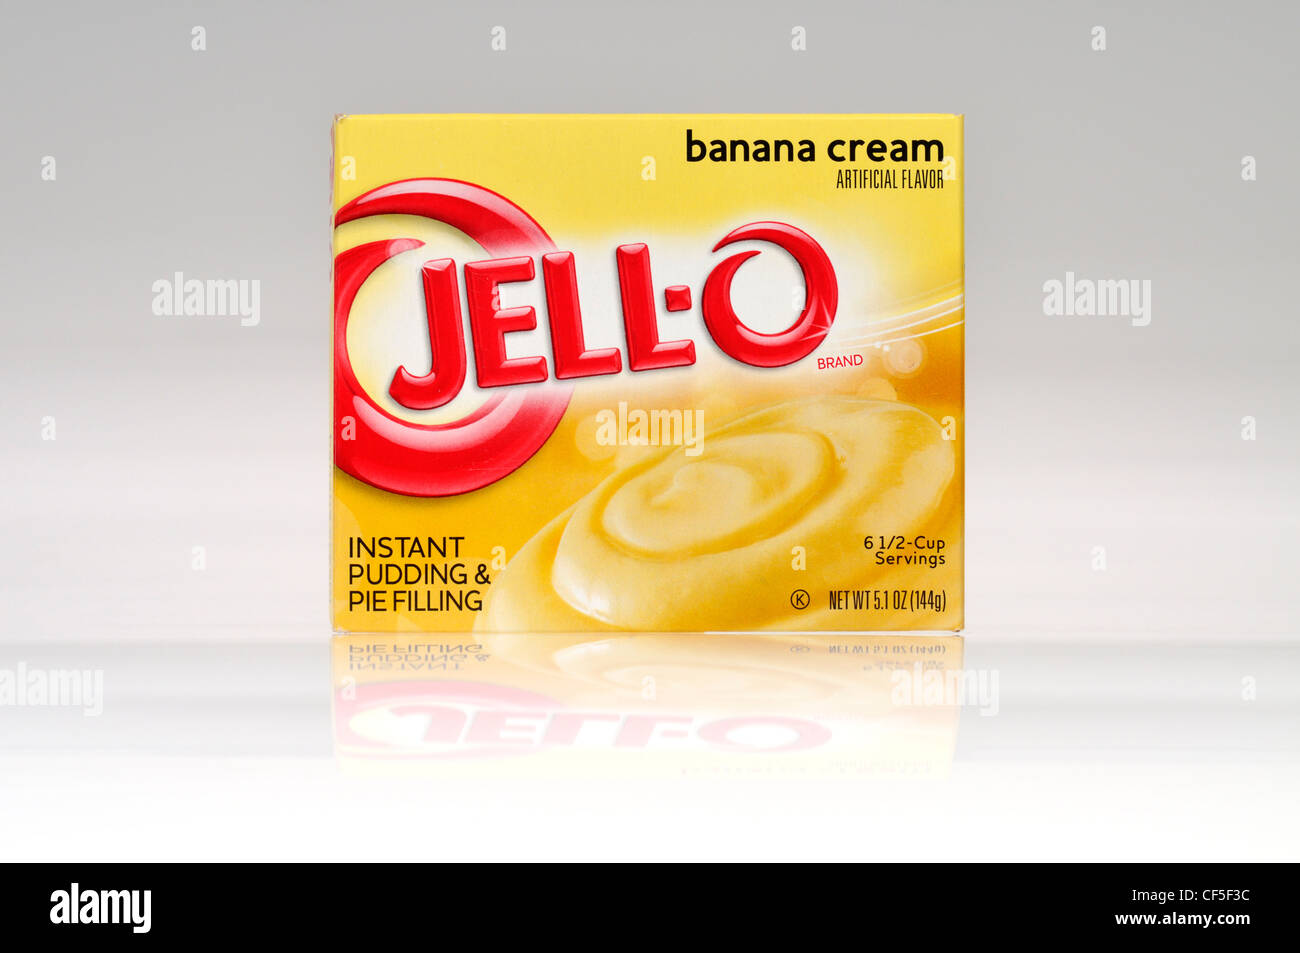 A package of jello instant pudding and pie filling banana cream flavor on white background cut out USA. Stock Photo